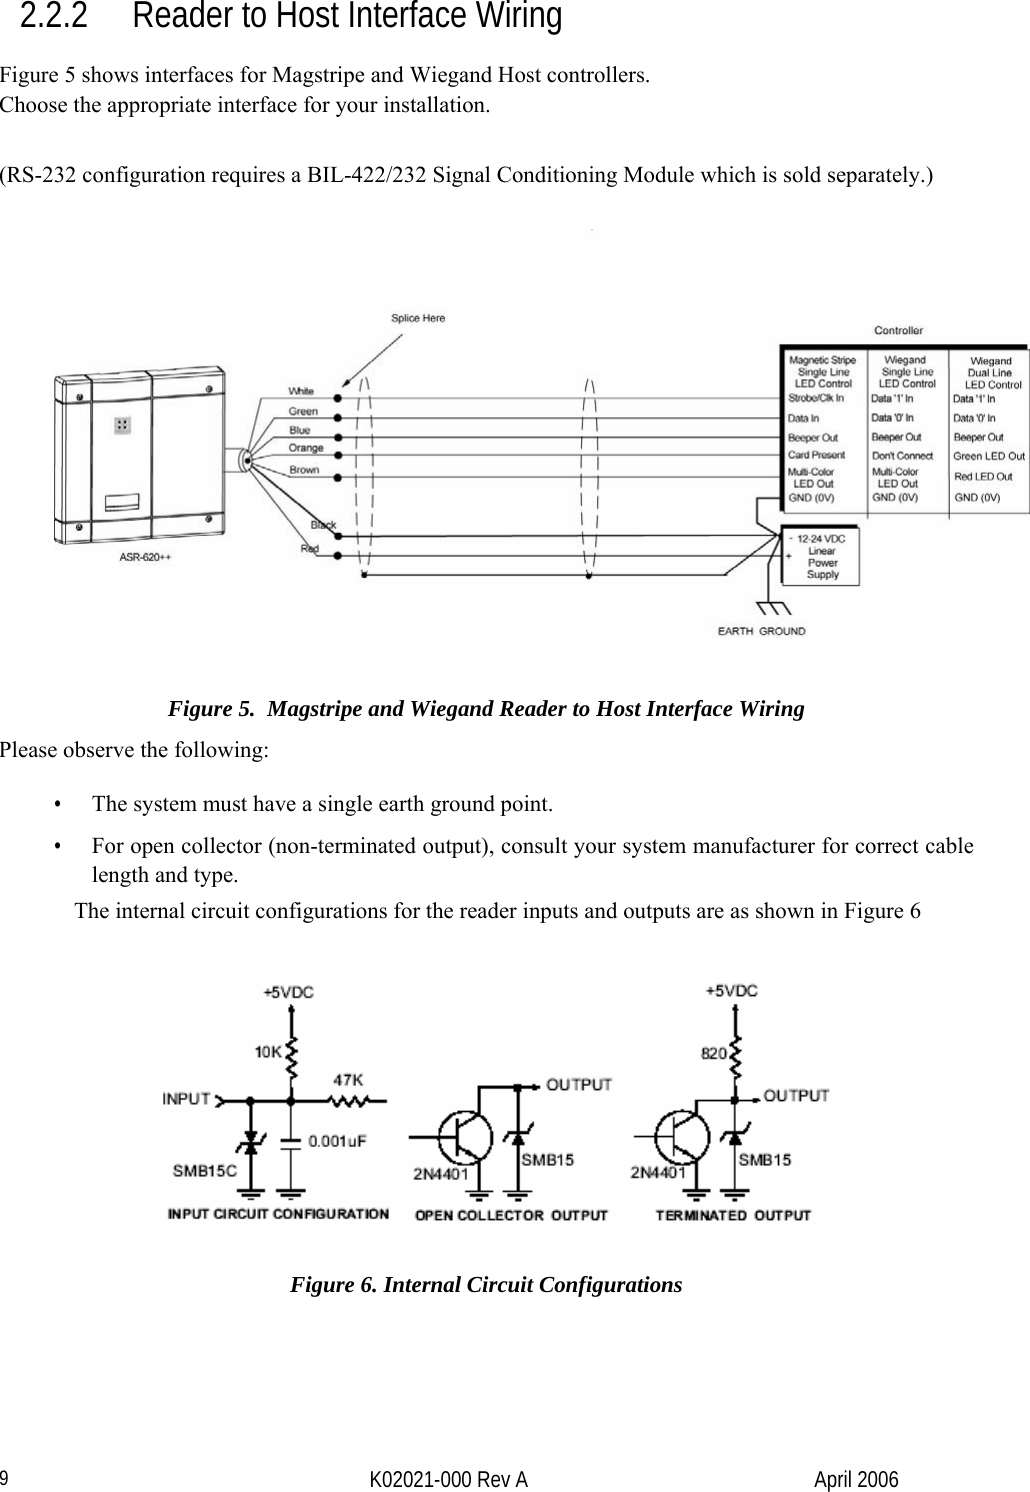   K02021-000 Rev A  April 2006 92.2.2 Reader to Host Interface Wiring  Figure 5 shows interfaces for Magstripe and Wiegand Host controllers. Choose the appropriate interface for your installation.   (RS-232 configuration requires a BIL-422/232 Signal Conditioning Module which is sold separately.)       Figure 5.  Magstripe and Wiegand Reader to Host Interface Wiring Please observe the following: •  The system must have a single earth ground point.  •  For open collector (non-terminated output), consult your system manufacturer for correct cable length and type. The internal circuit configurations for the reader inputs and outputs are as shown in Figure 6    Figure 6. Internal Circuit Configurations   